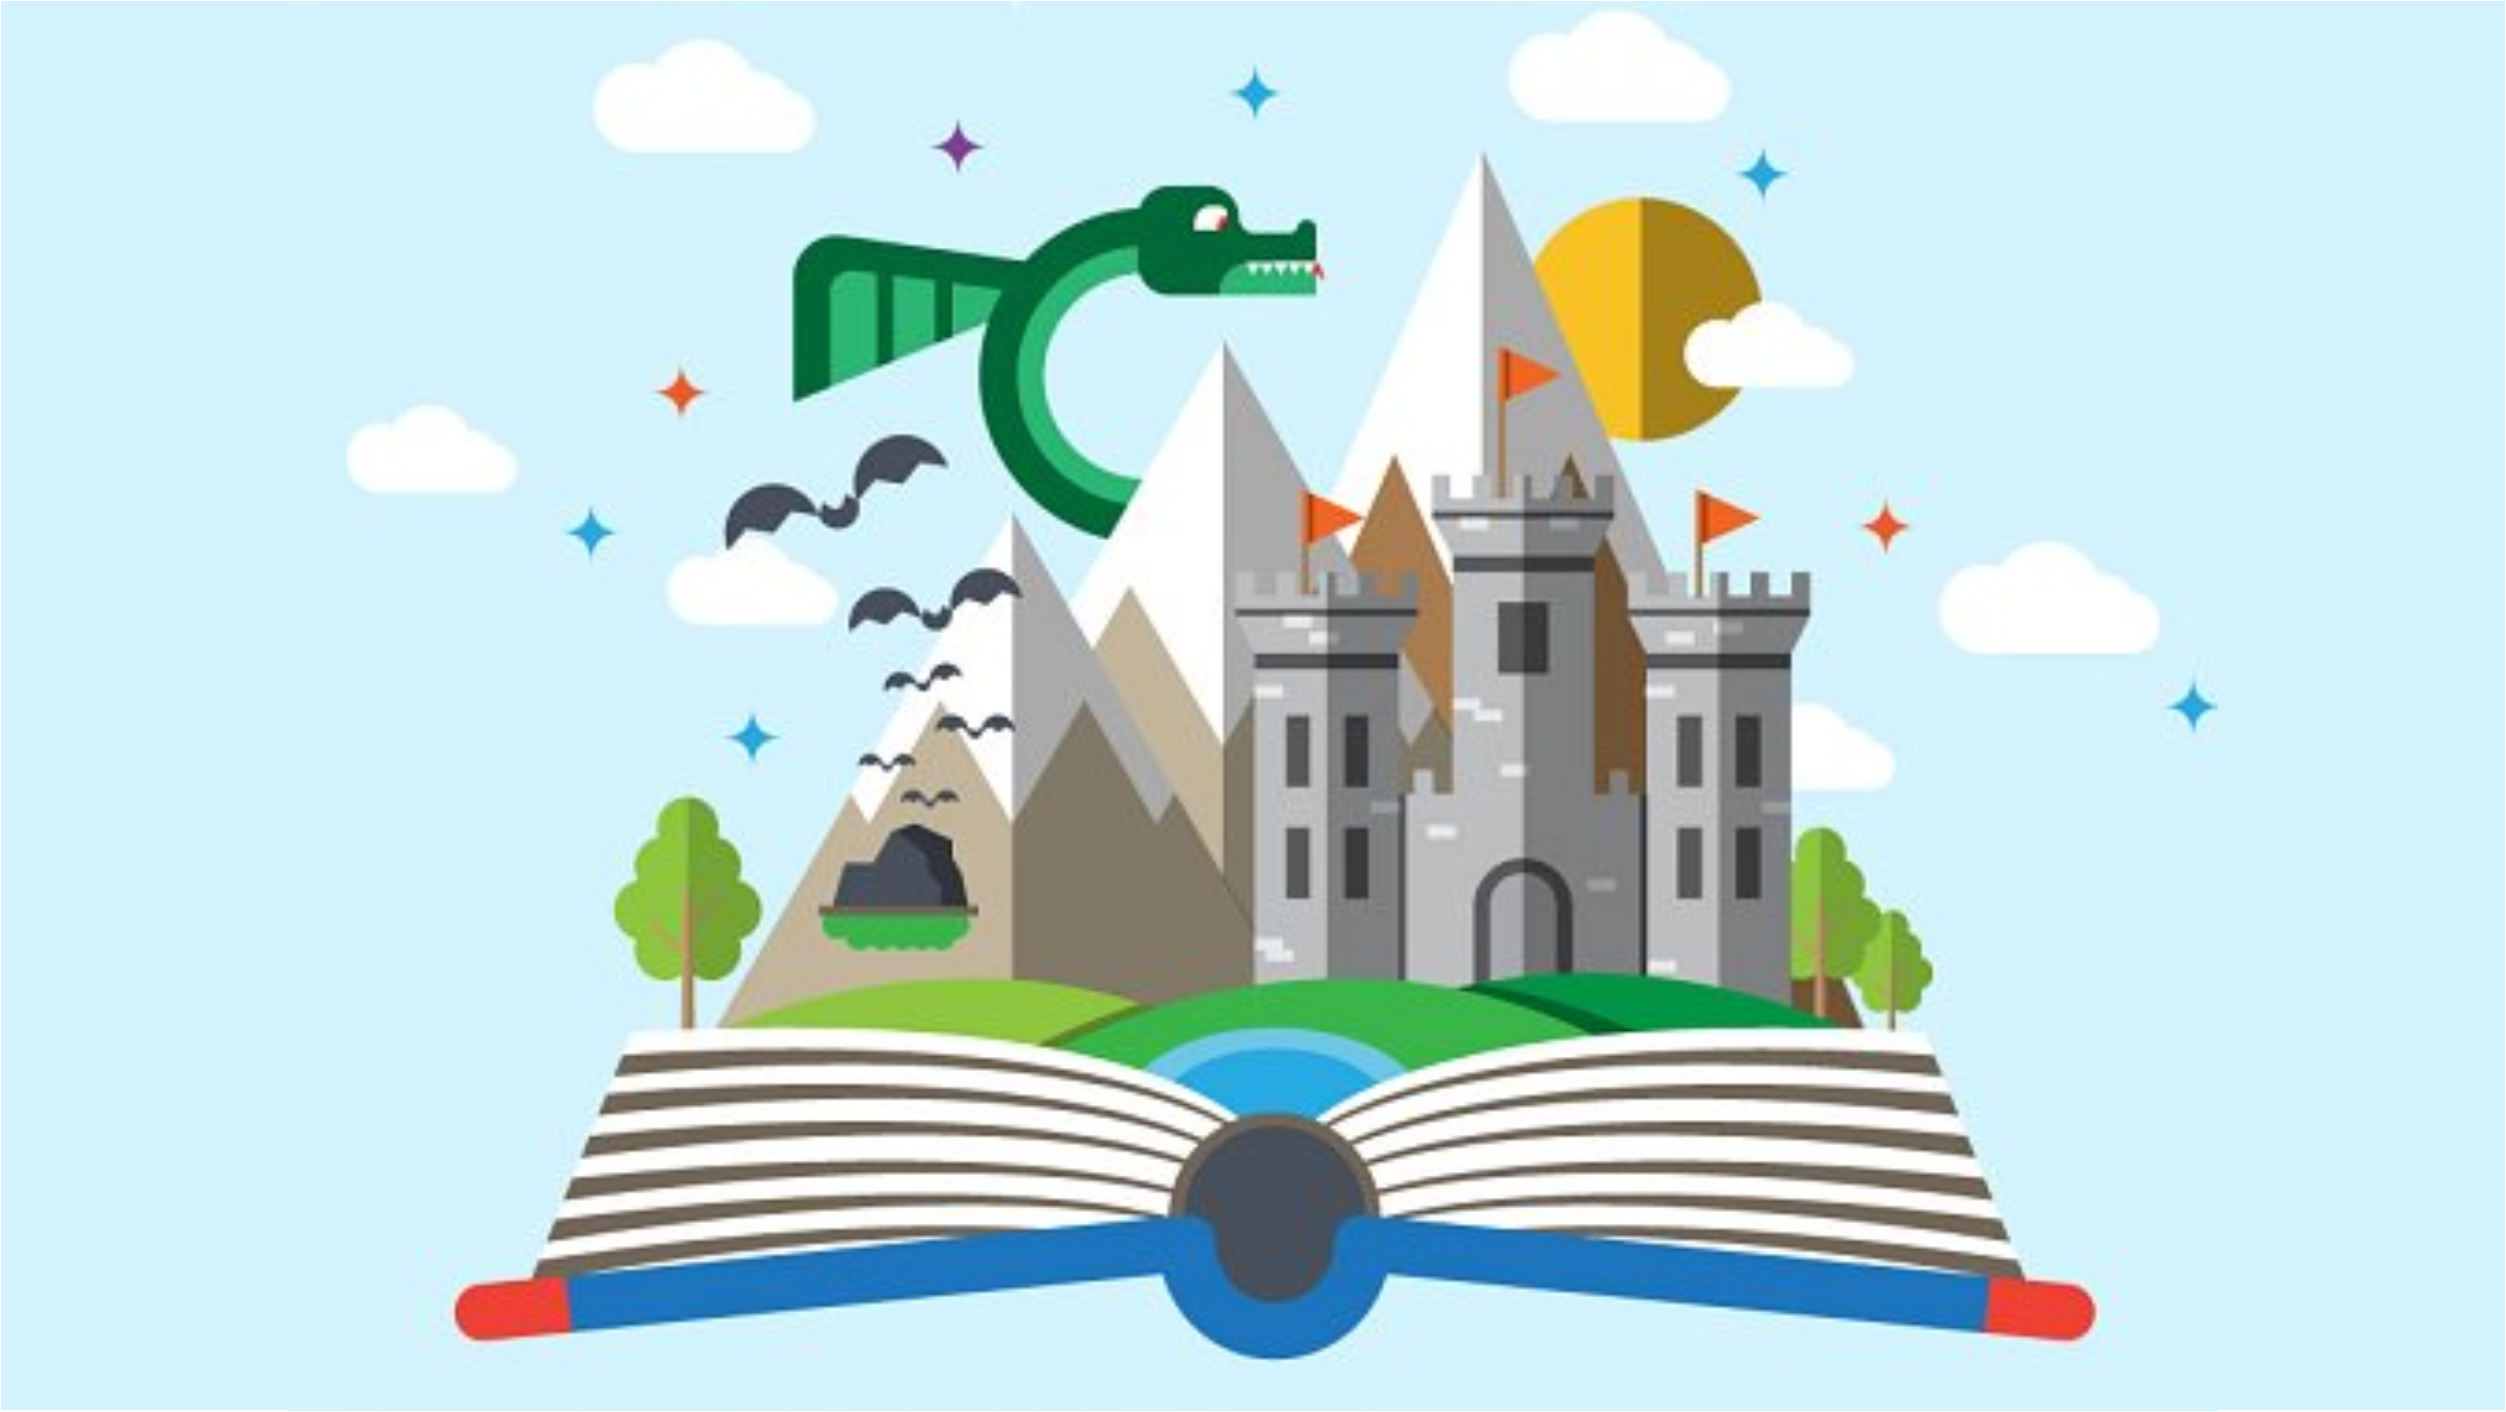 Open story book with castle, dragon, mountains, and moon